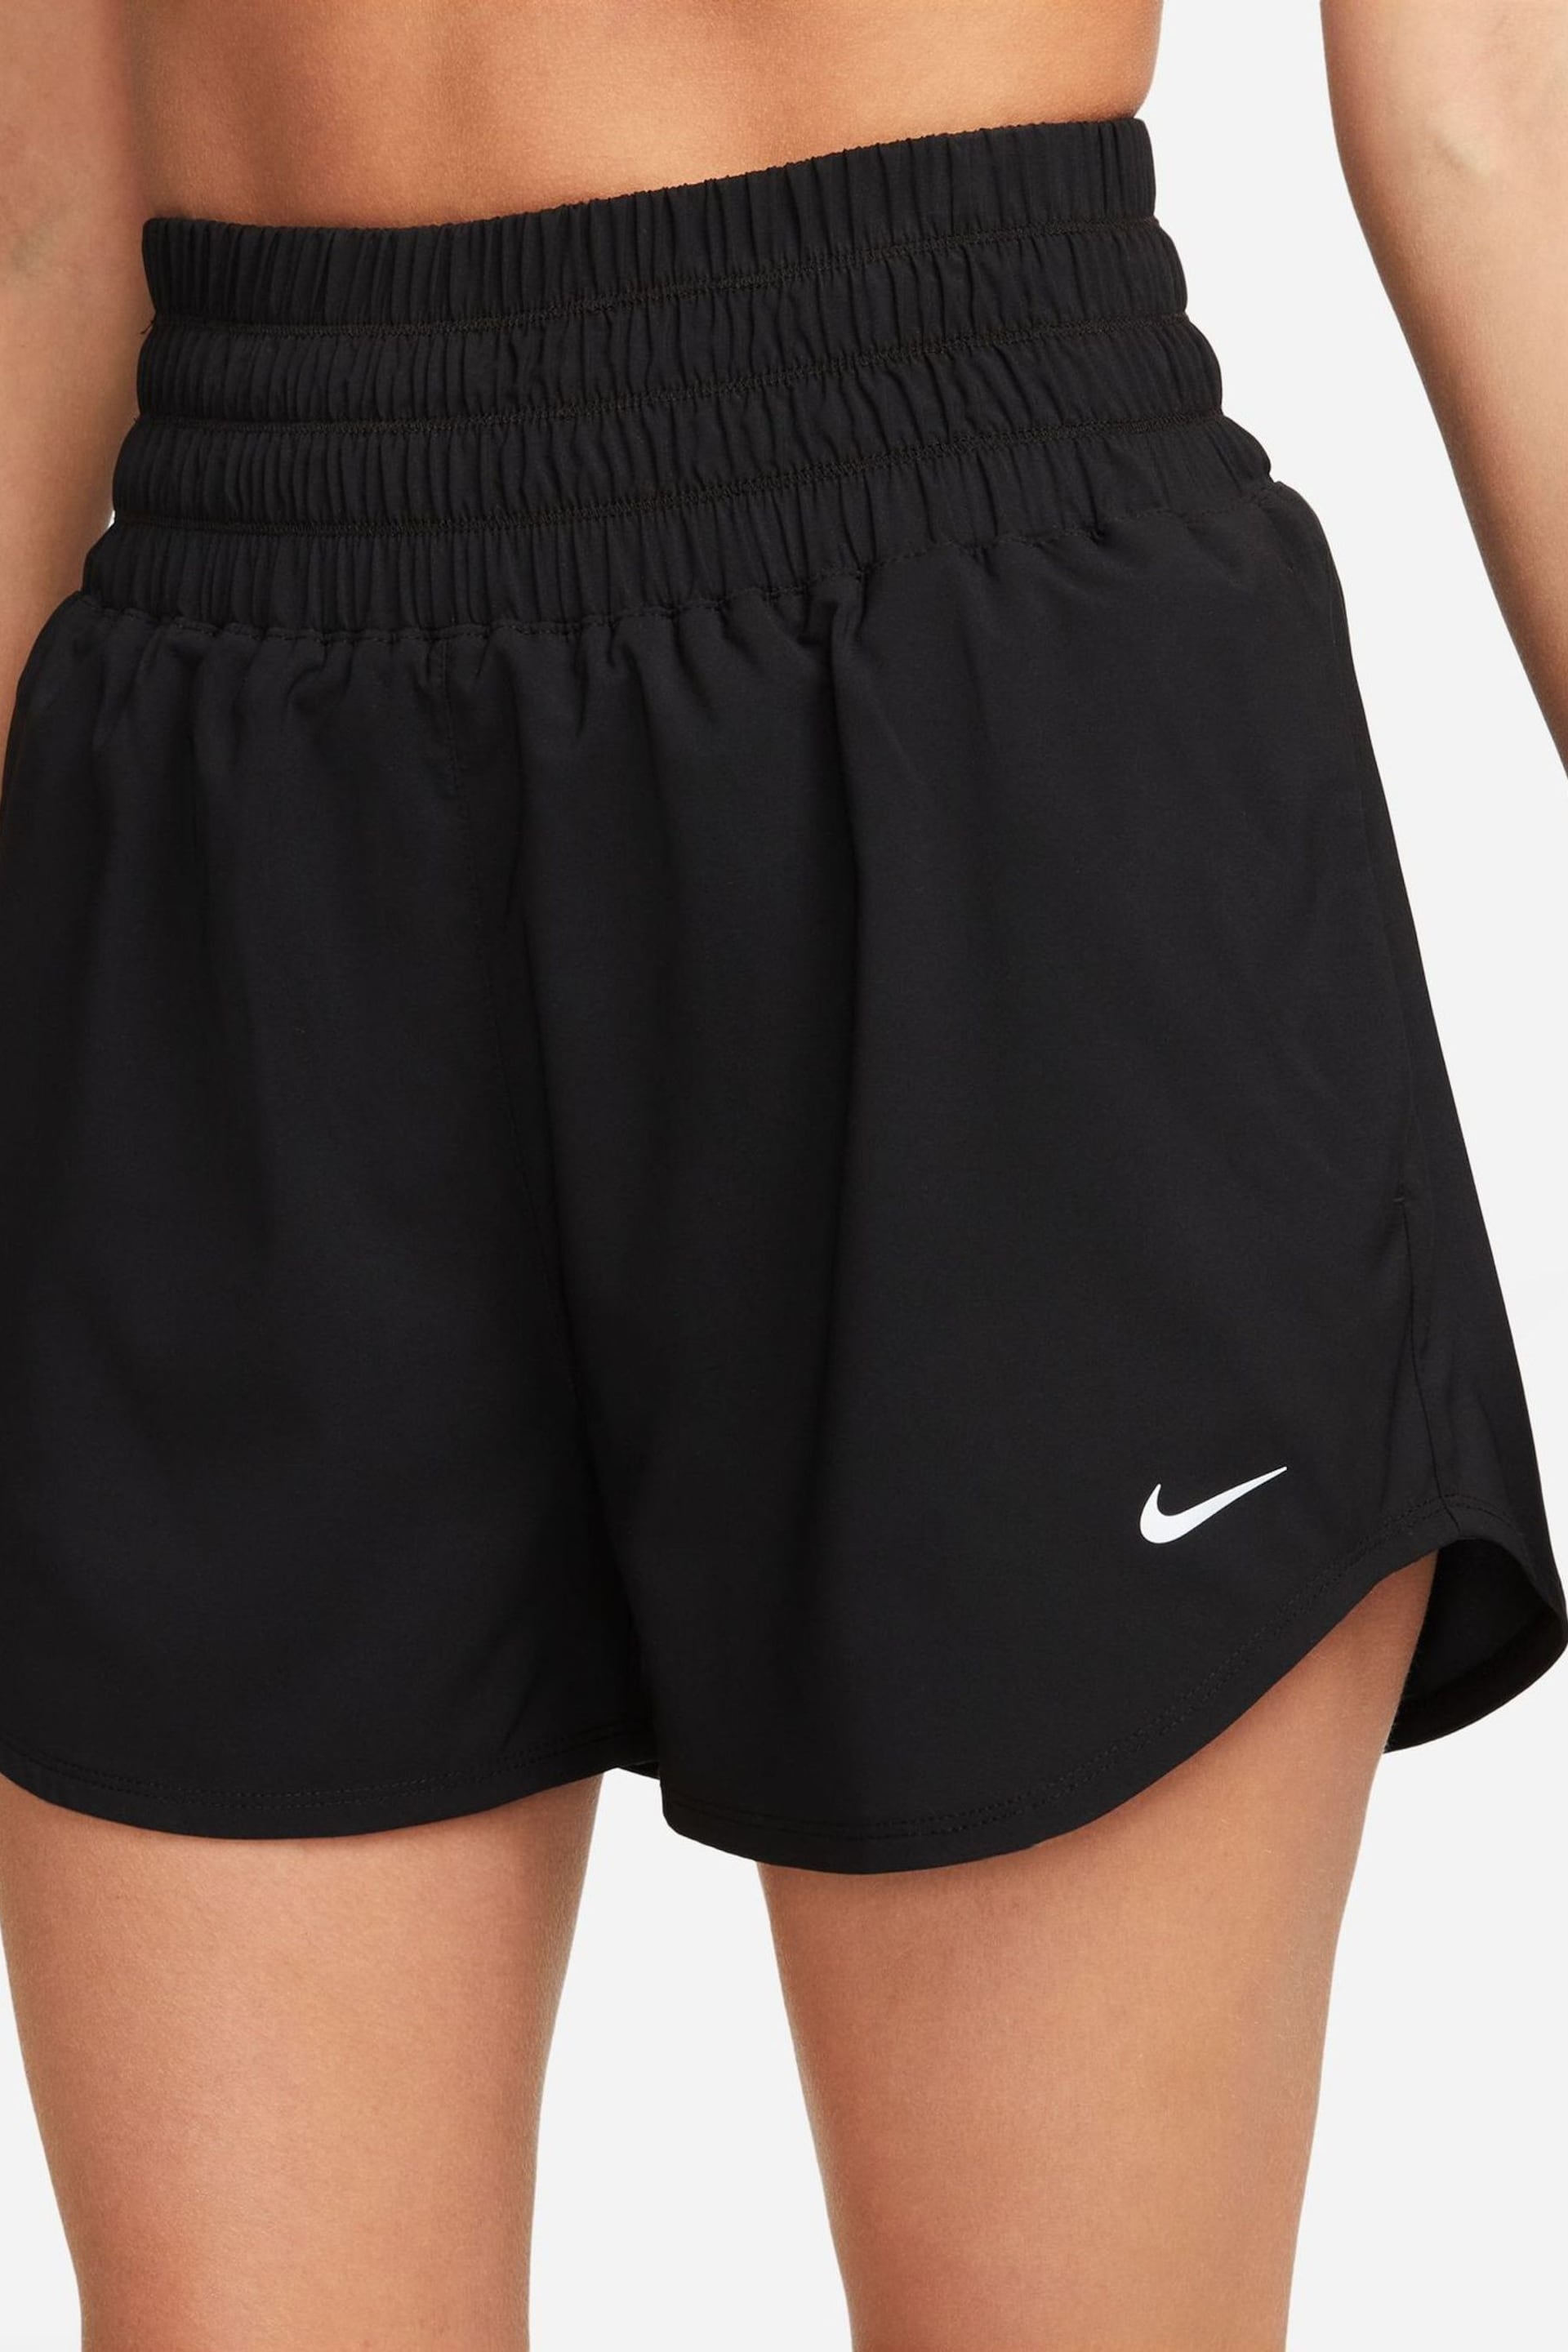 Nike Black One Dri-Fit Ultra High Waisted 3 Inch Brief Lined Shorts - Image 3 of 7